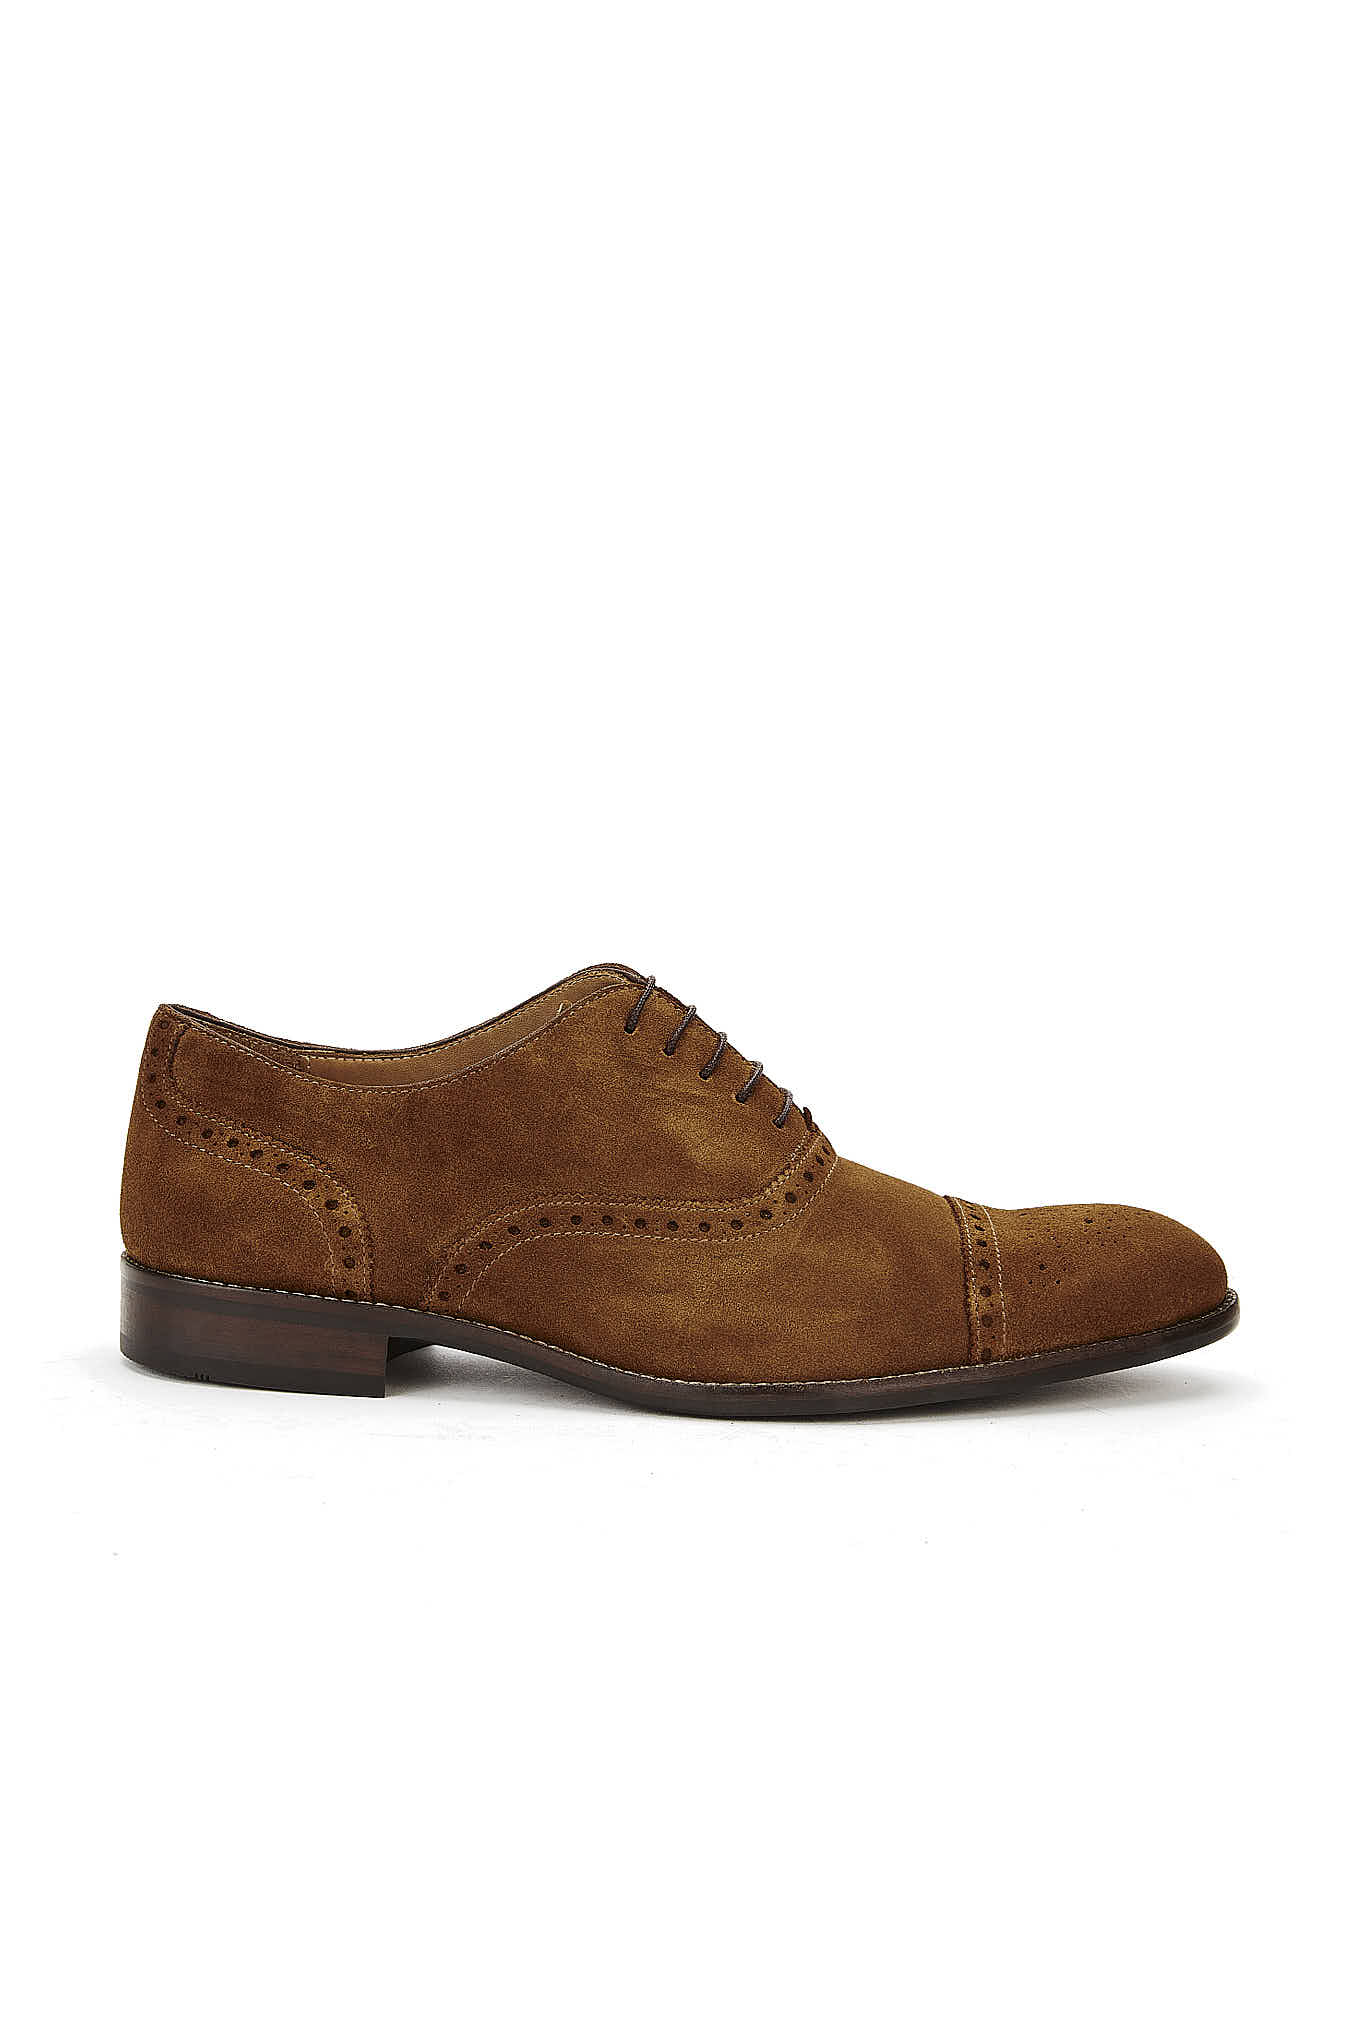 Shoes Camel Casual Man